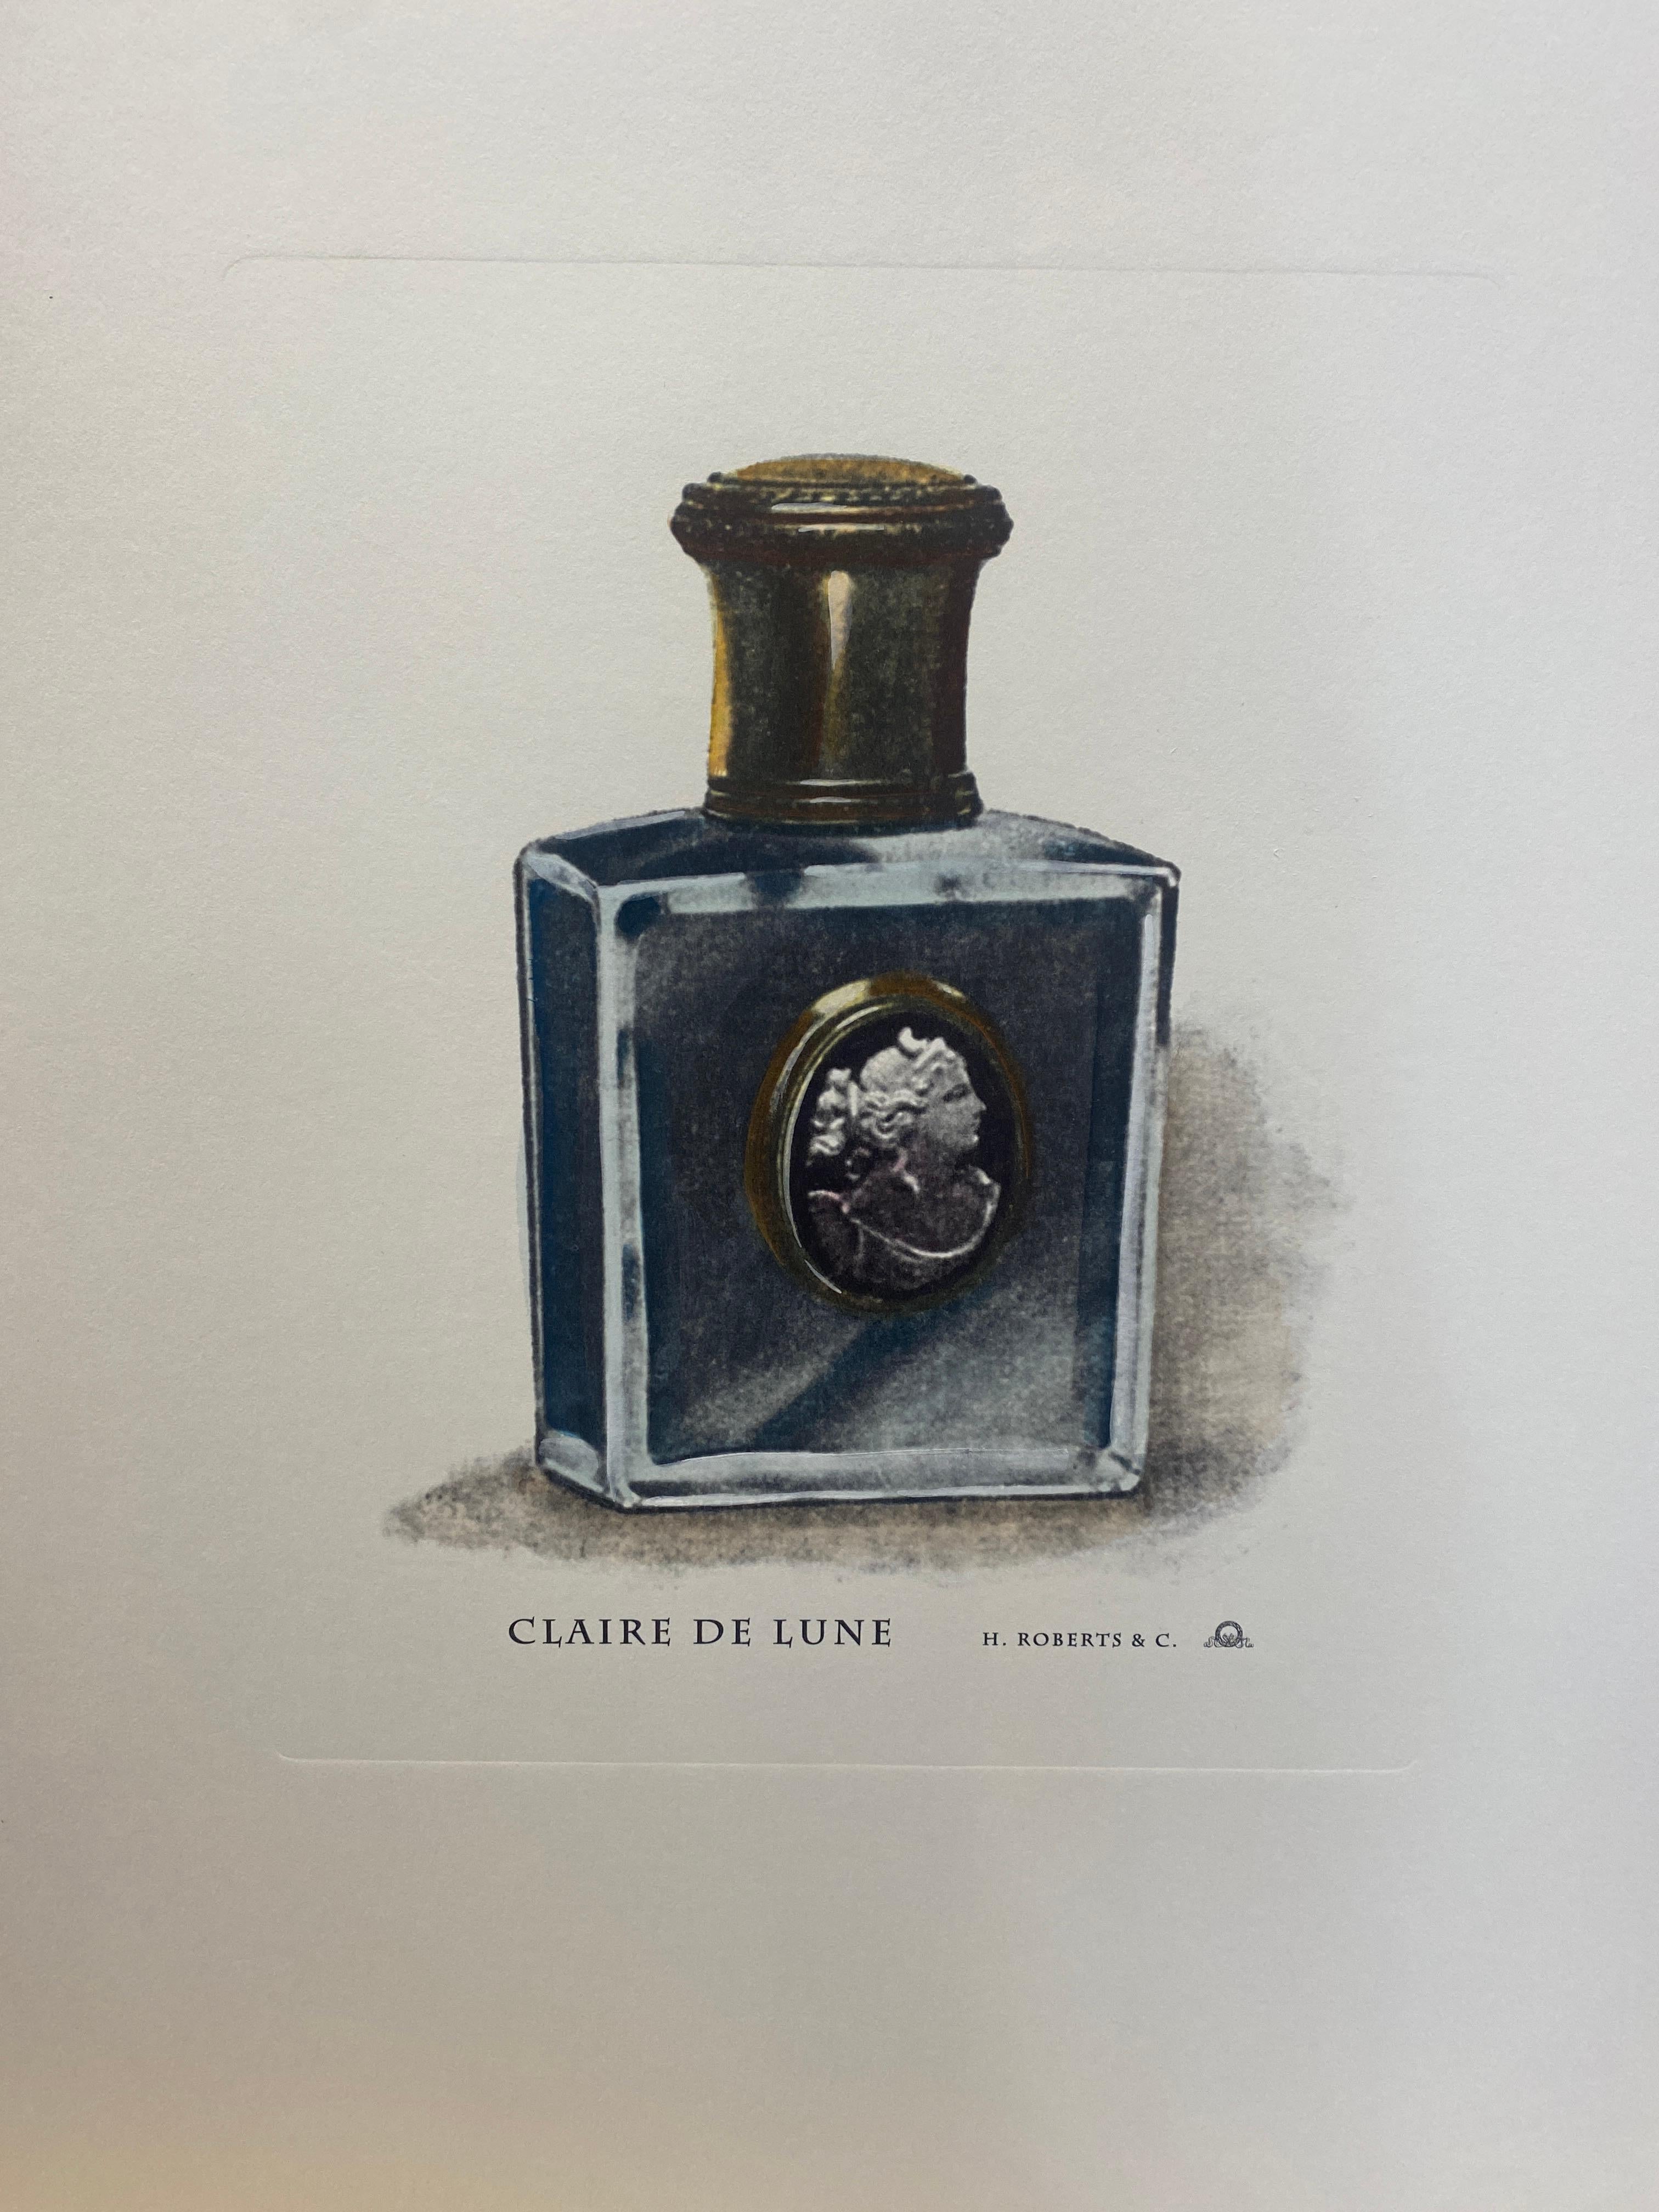 Elegant hand-pressed print representing   representing vintage bottles of perfume marketed and produced by the ancient firm H. Roberts and C.  In this one we find the parfume called 